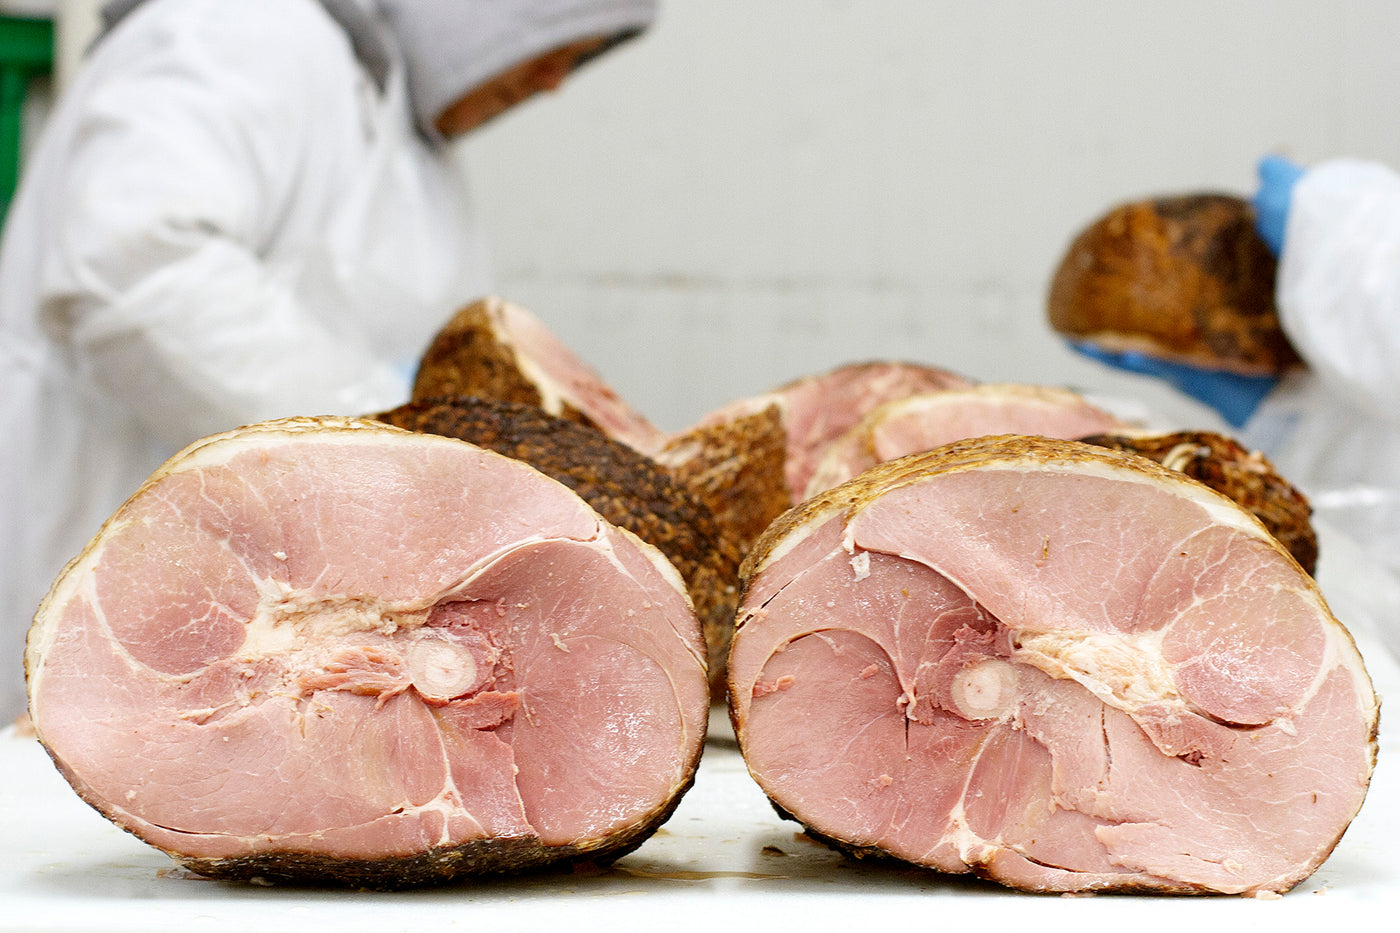 Two bone in hams sit on a counter in the Pederson's Farms plant. Workers are seen in the background preparing the hams.